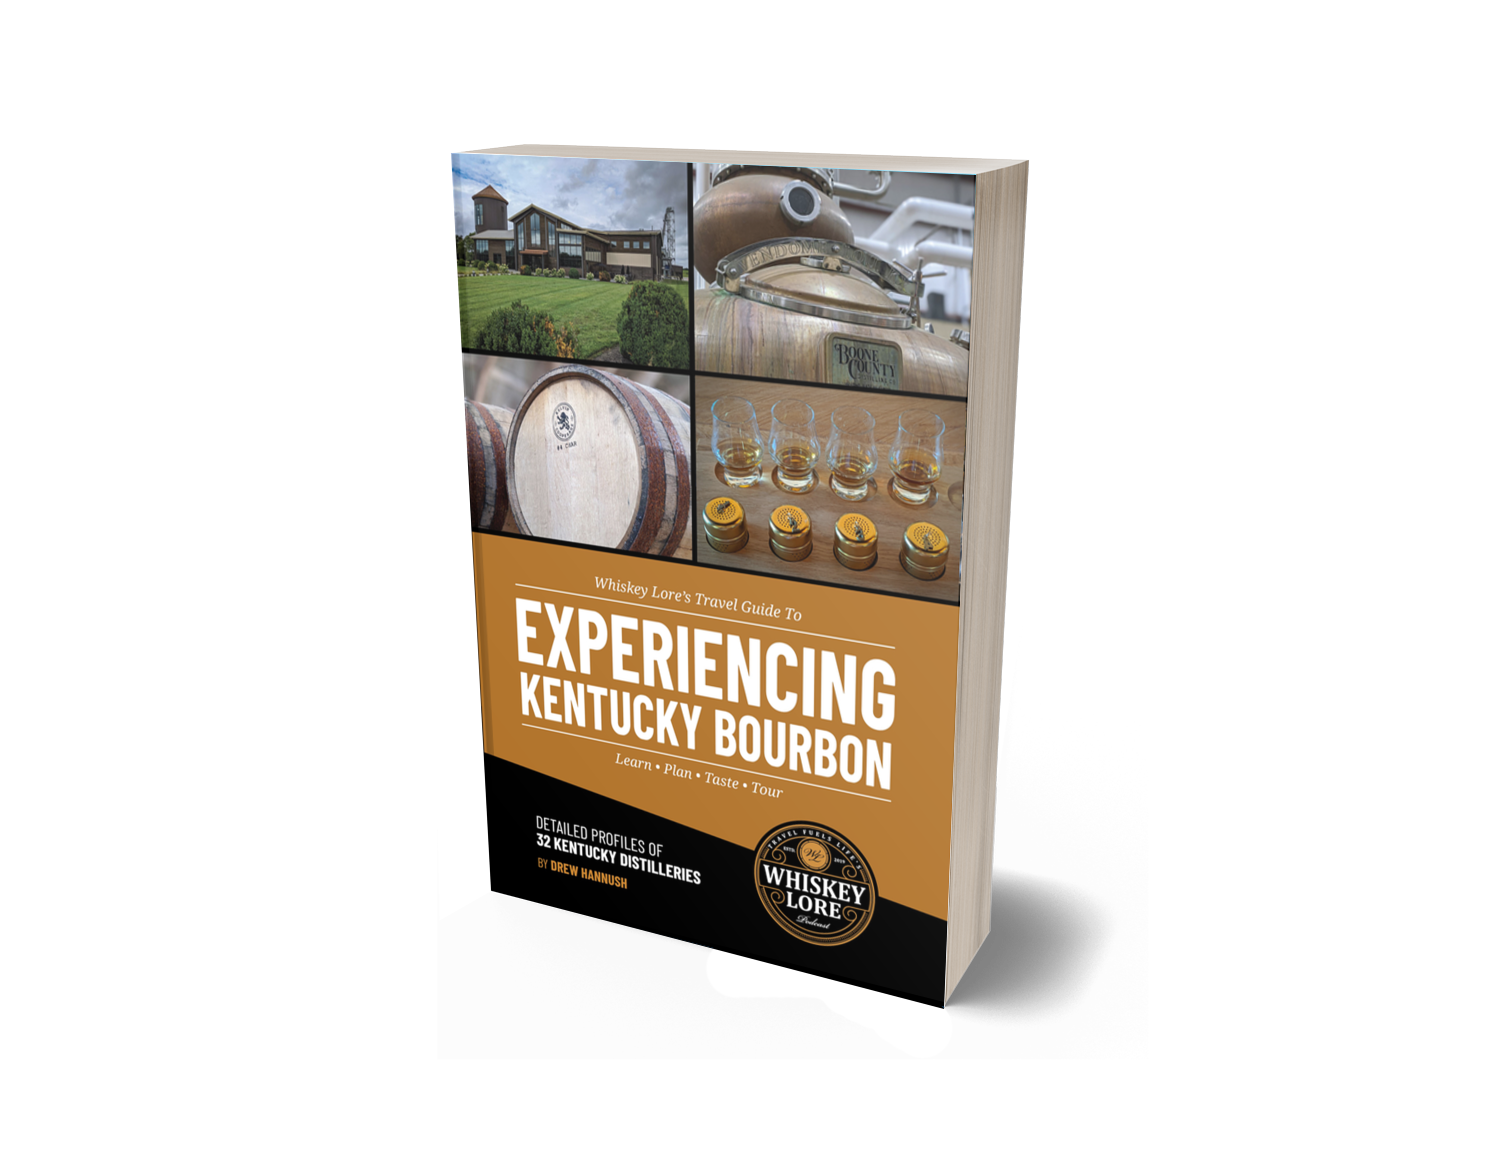 Picture of Whiskey Lore's Travel Guide to Experiencing Kentucky Bourbon book (with link to Whiskey Lore's Online Shop)